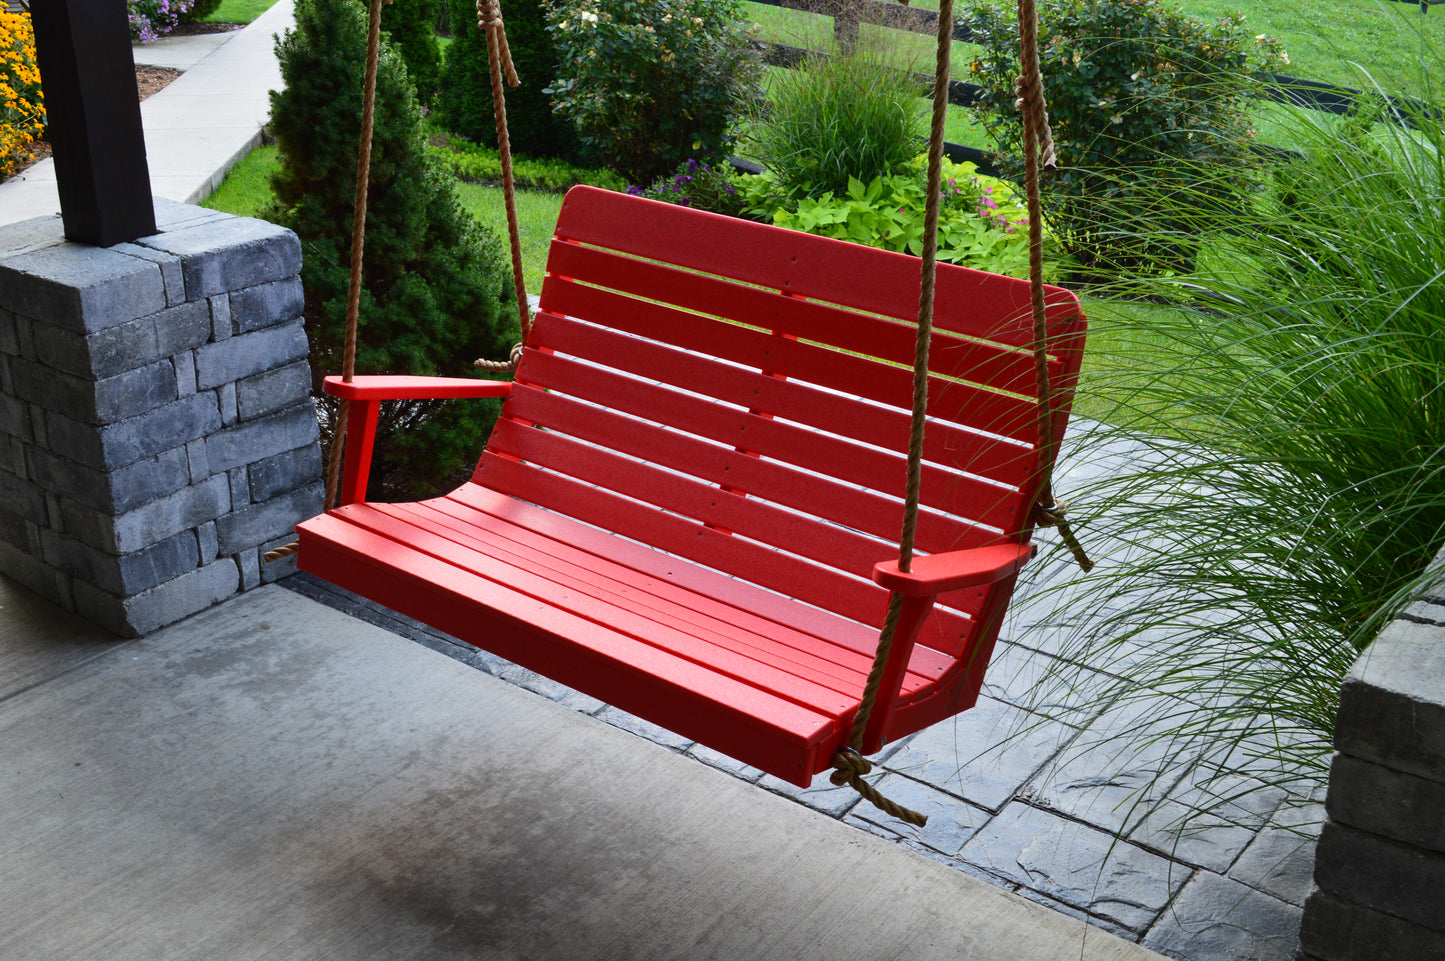 Winston Recycled Plastic Porch Swing